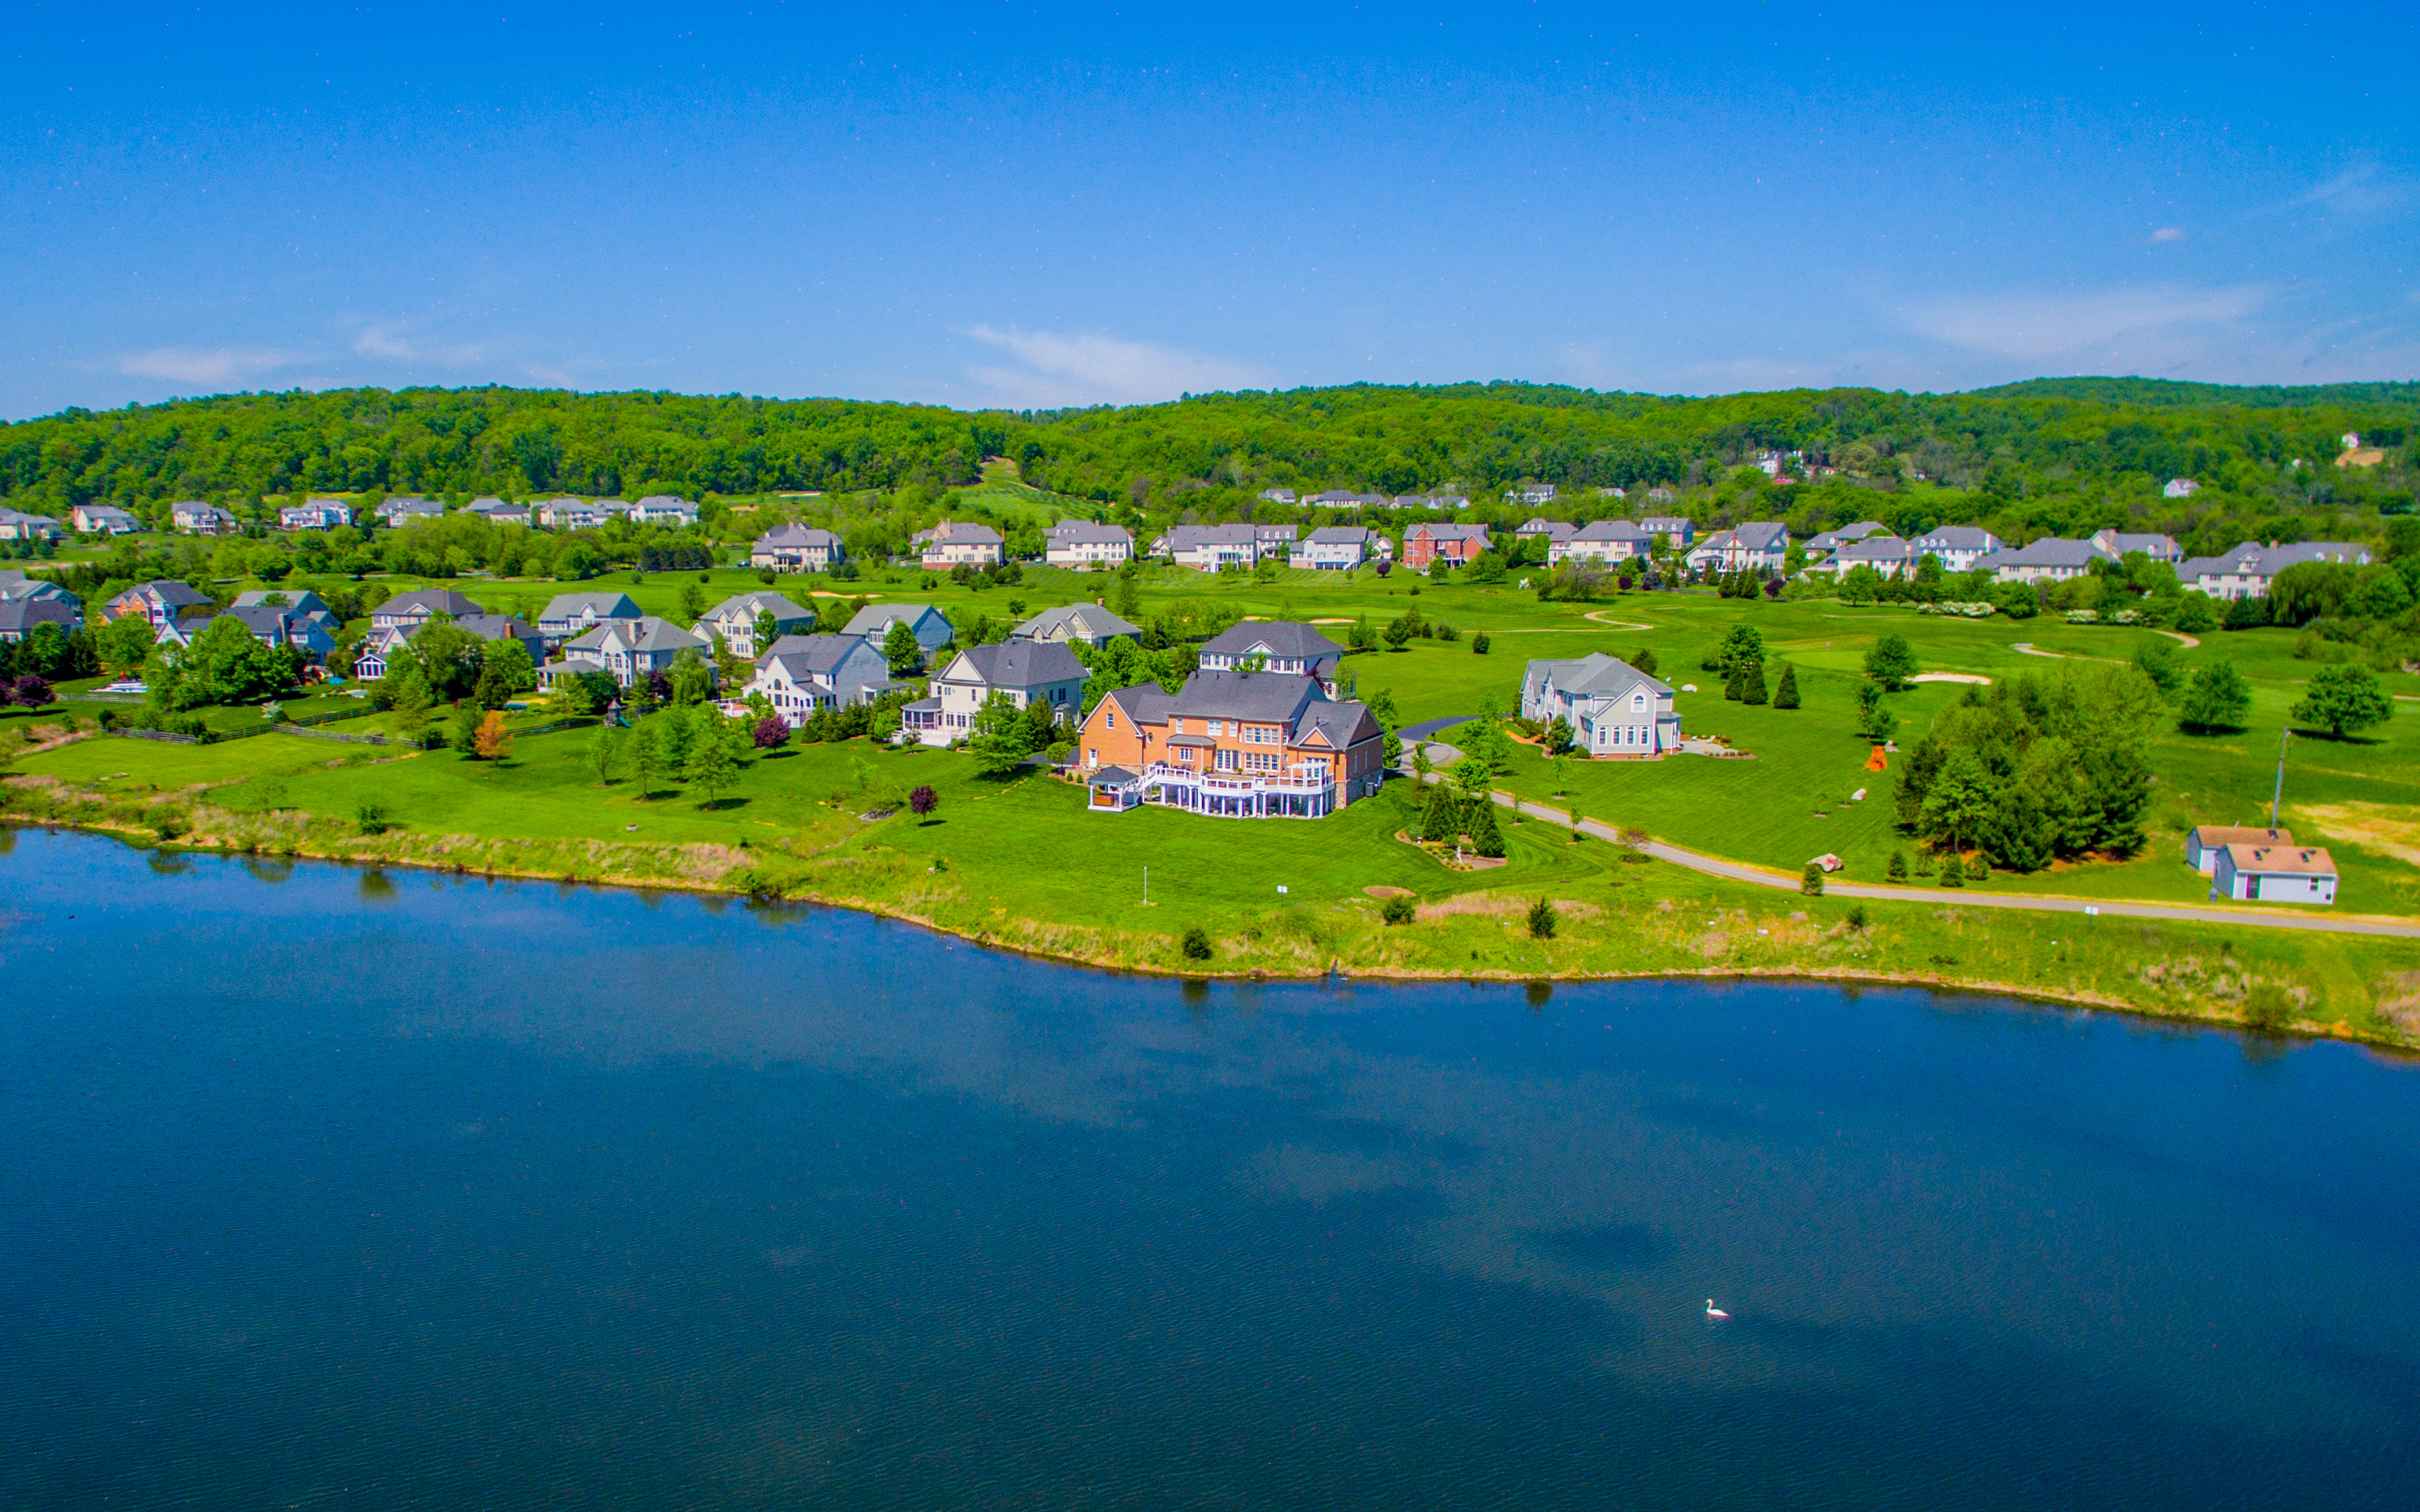 Benefits of Using Drone Videos For Real Estate Listings